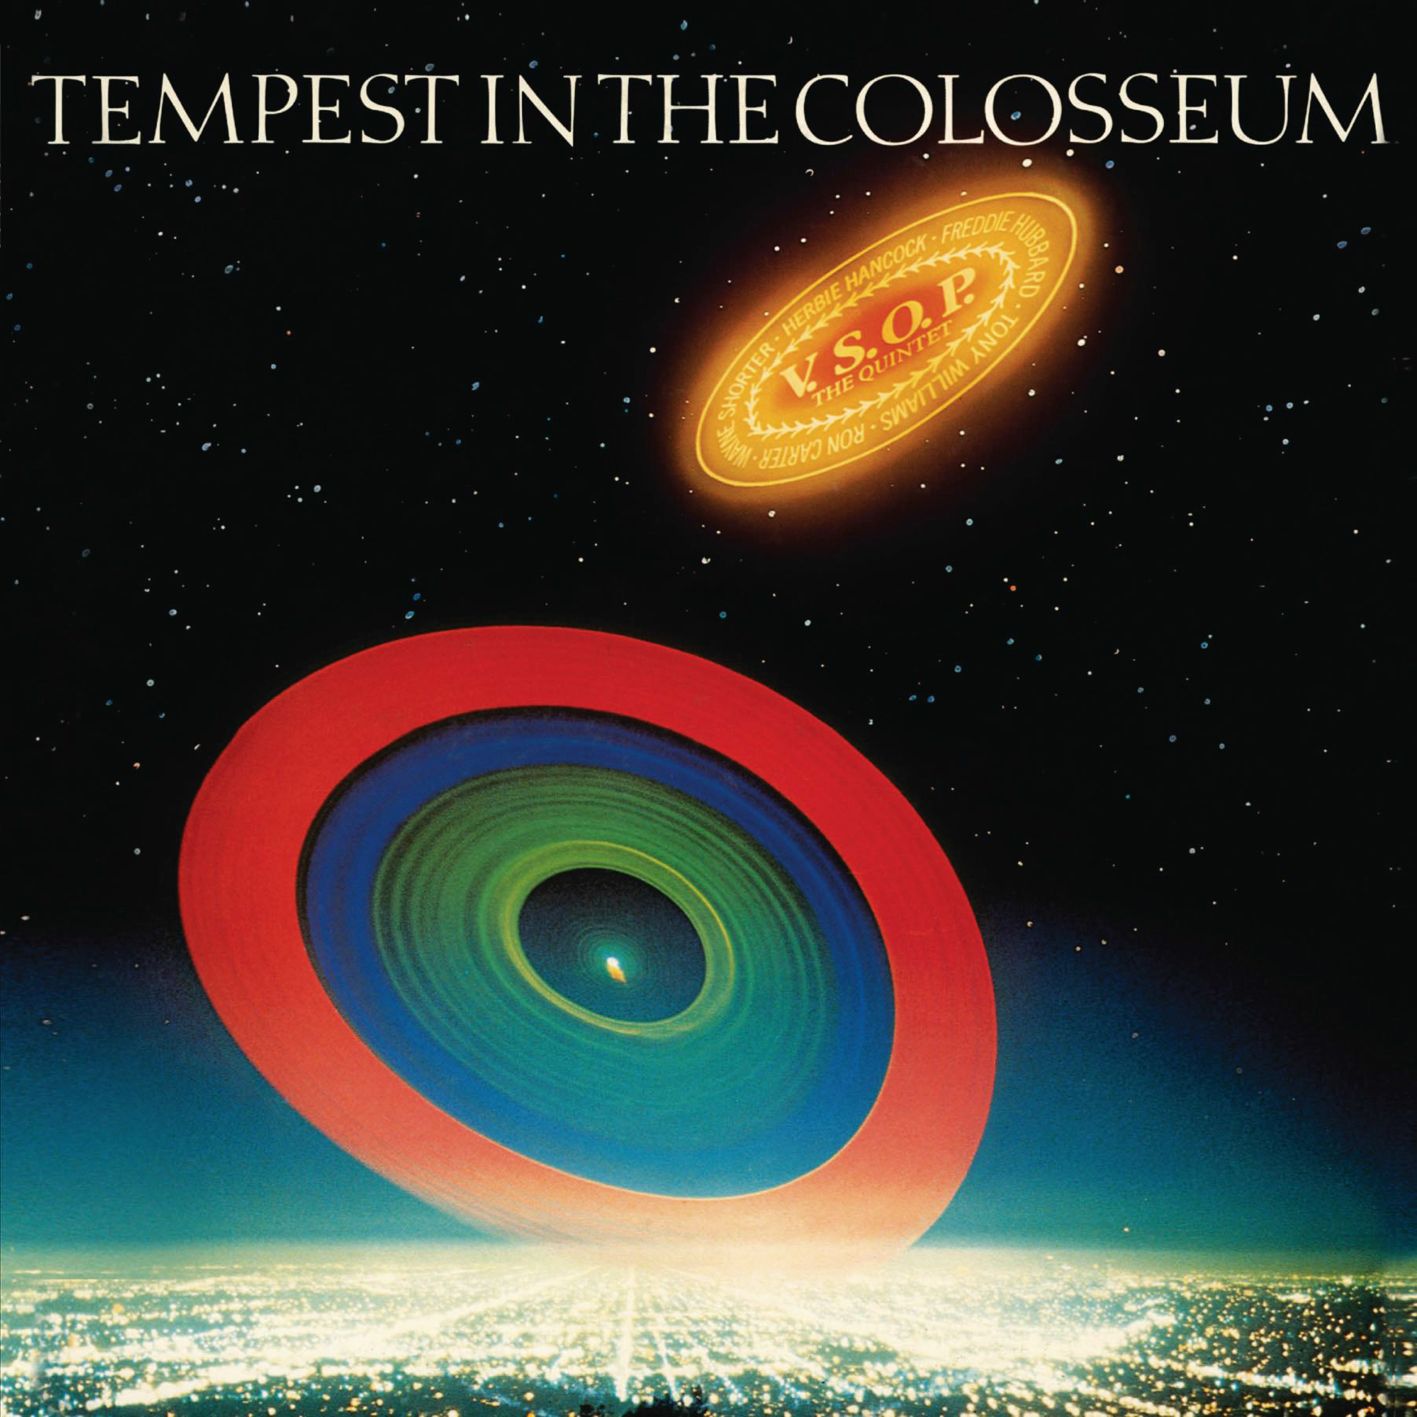 V.S.O.P. The Quintet – Tempest In The Colosseum (1977) [Japanese SACD Reissue 2007] SACD ISO + Hi-Res FLAC